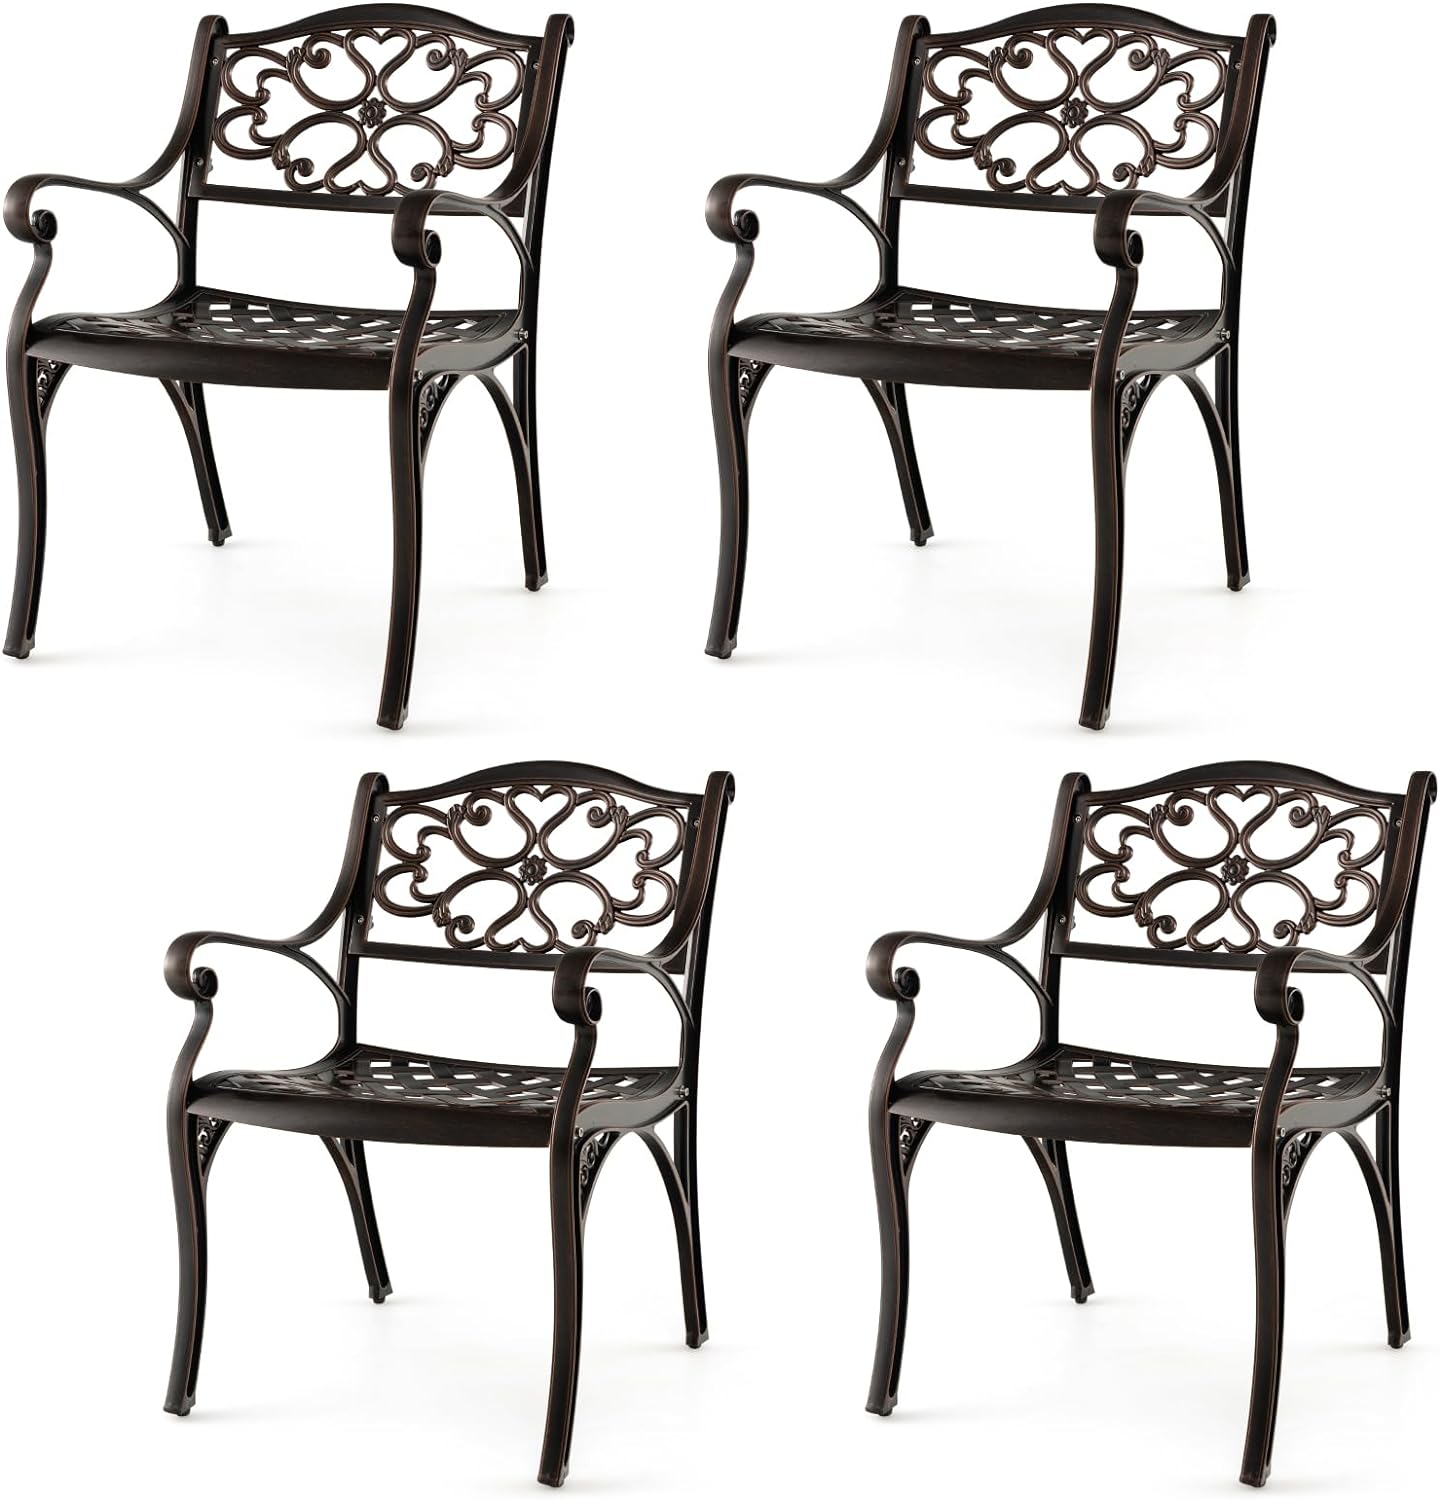 Giantex Cast Aluminum Patio Chairs Set of 2, All Weather Outdoor Dining Chairs w/Armrests and Curved Seats